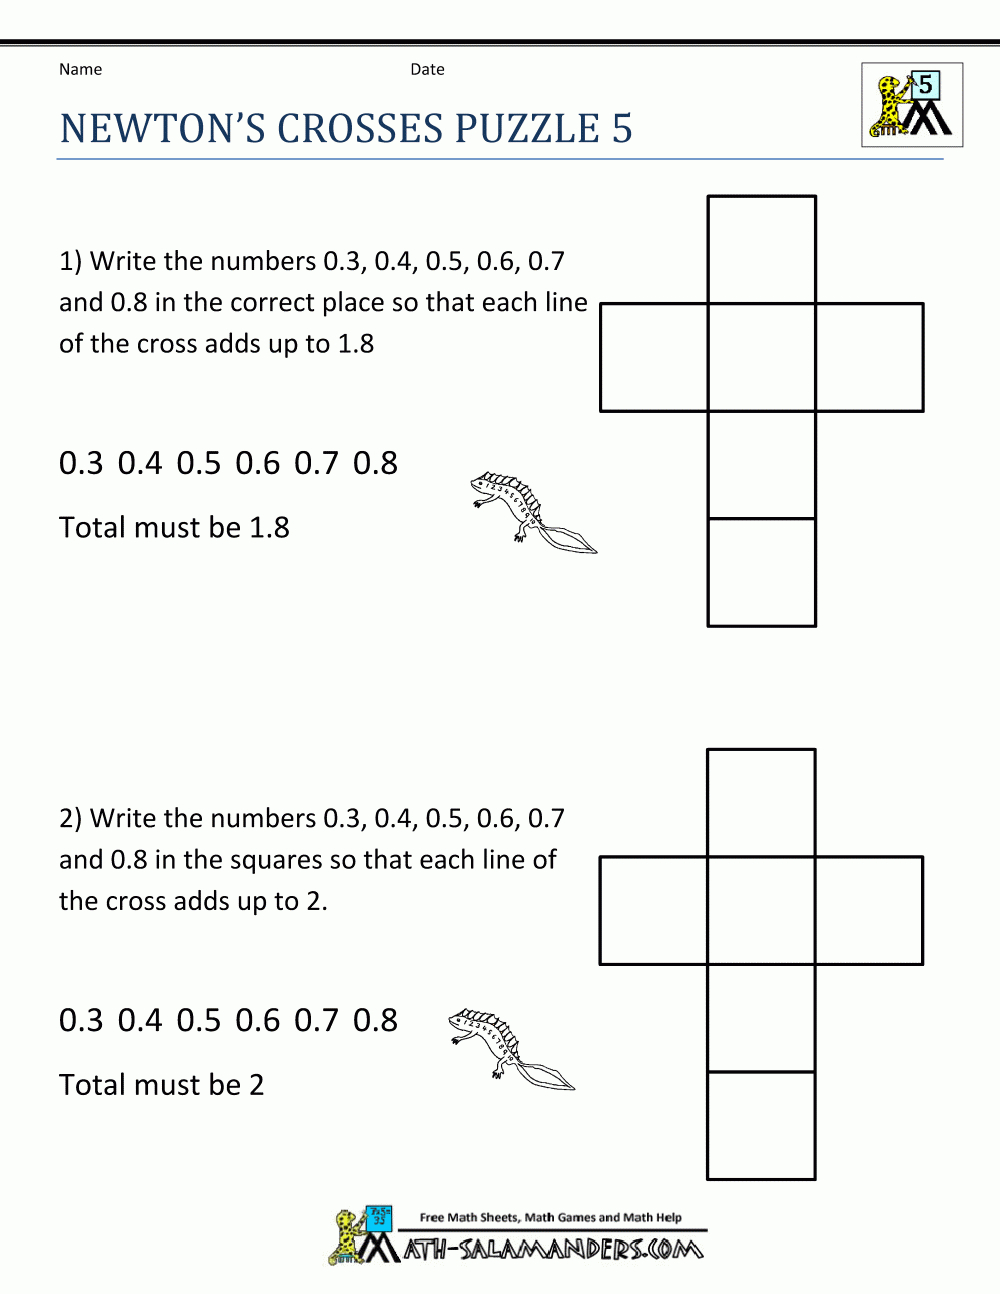 Fun Math Worksheets Newtons Crosses Puzzle 5 | Activities For Kids - Free Printable Math Puzzles